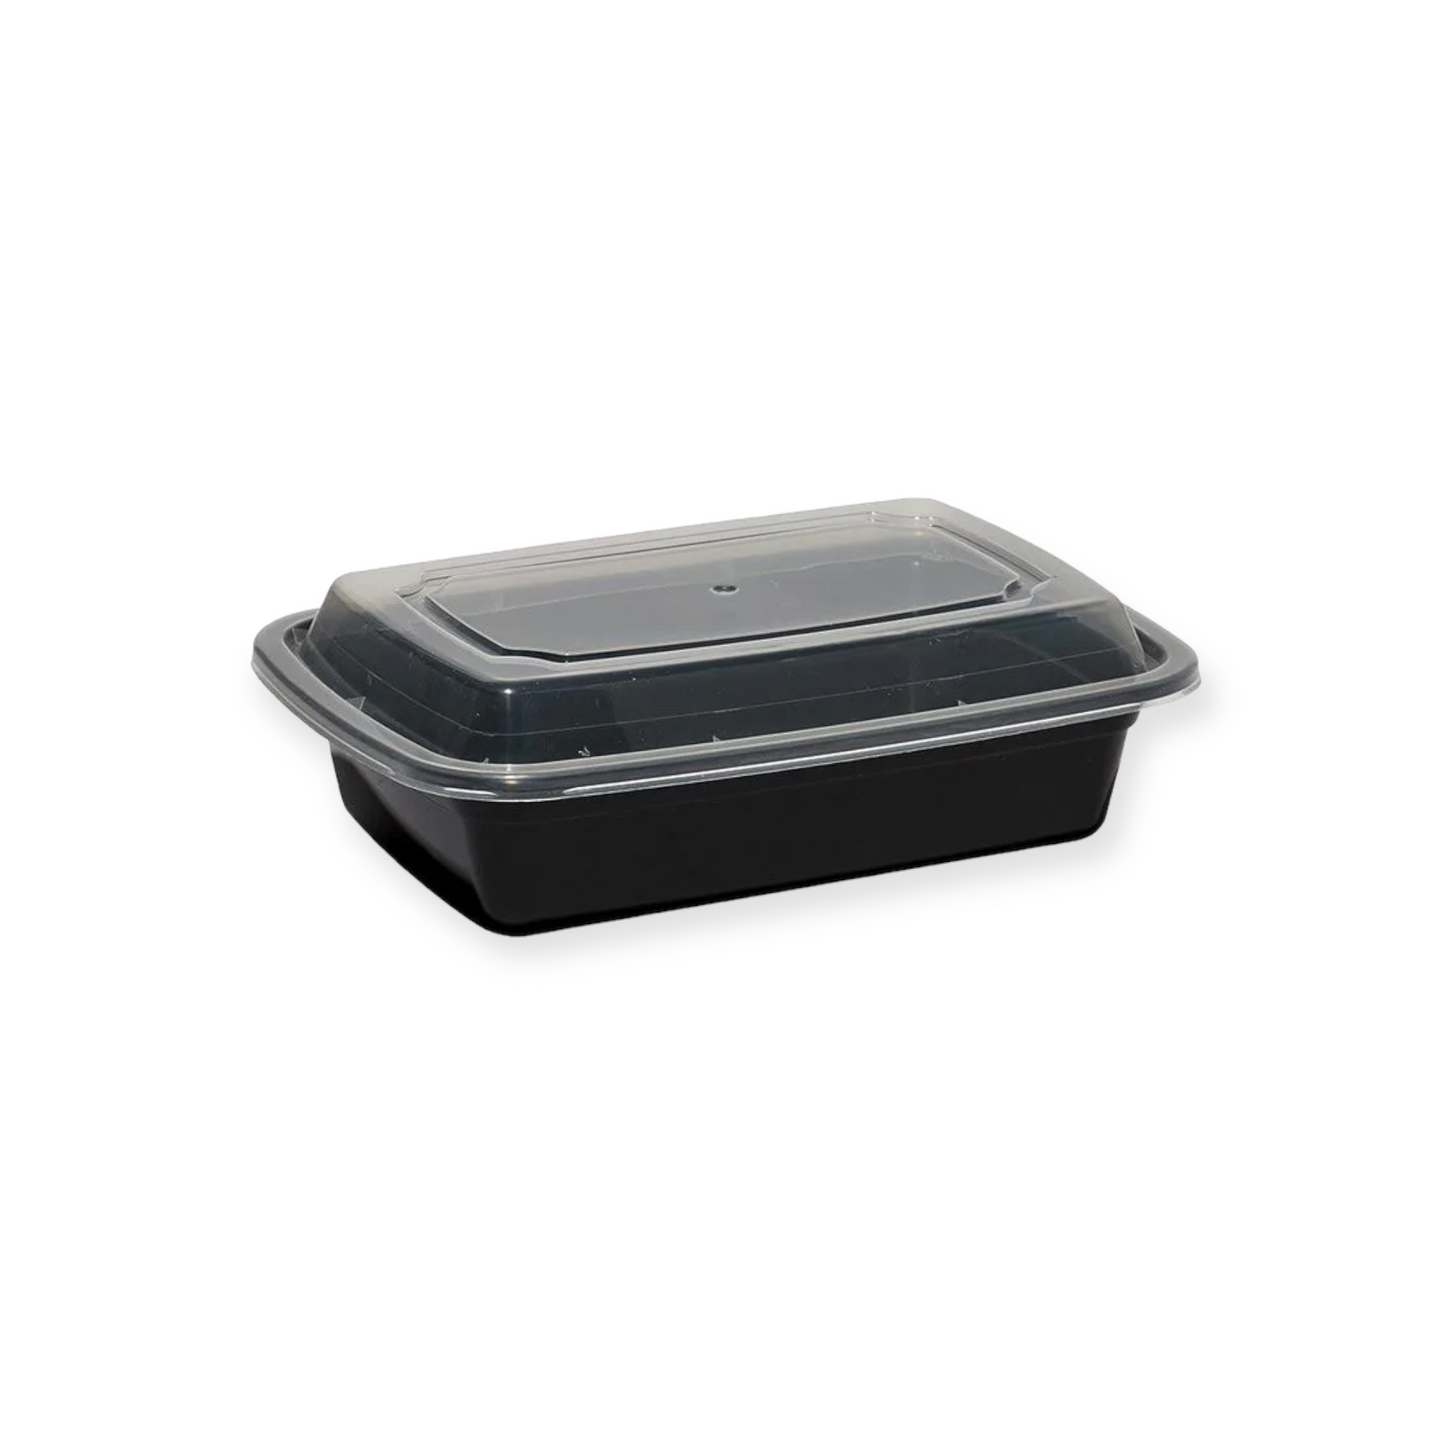 32oz. Black Rectangular Micro Carryout Containers with Lids 150 Sets